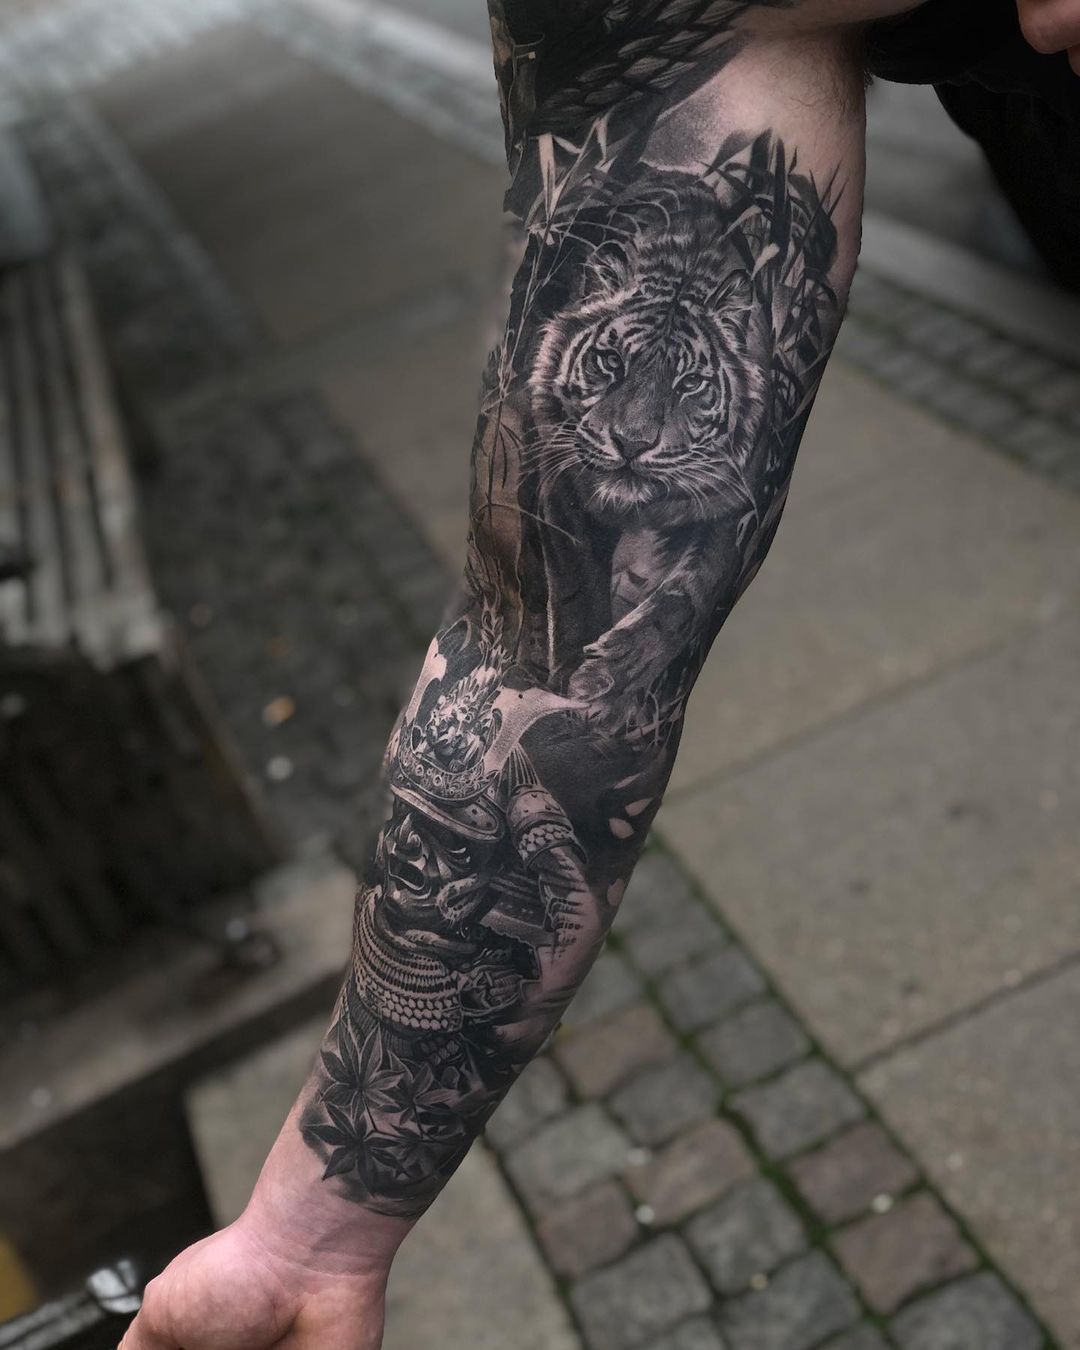 Style of tattoo sleeves